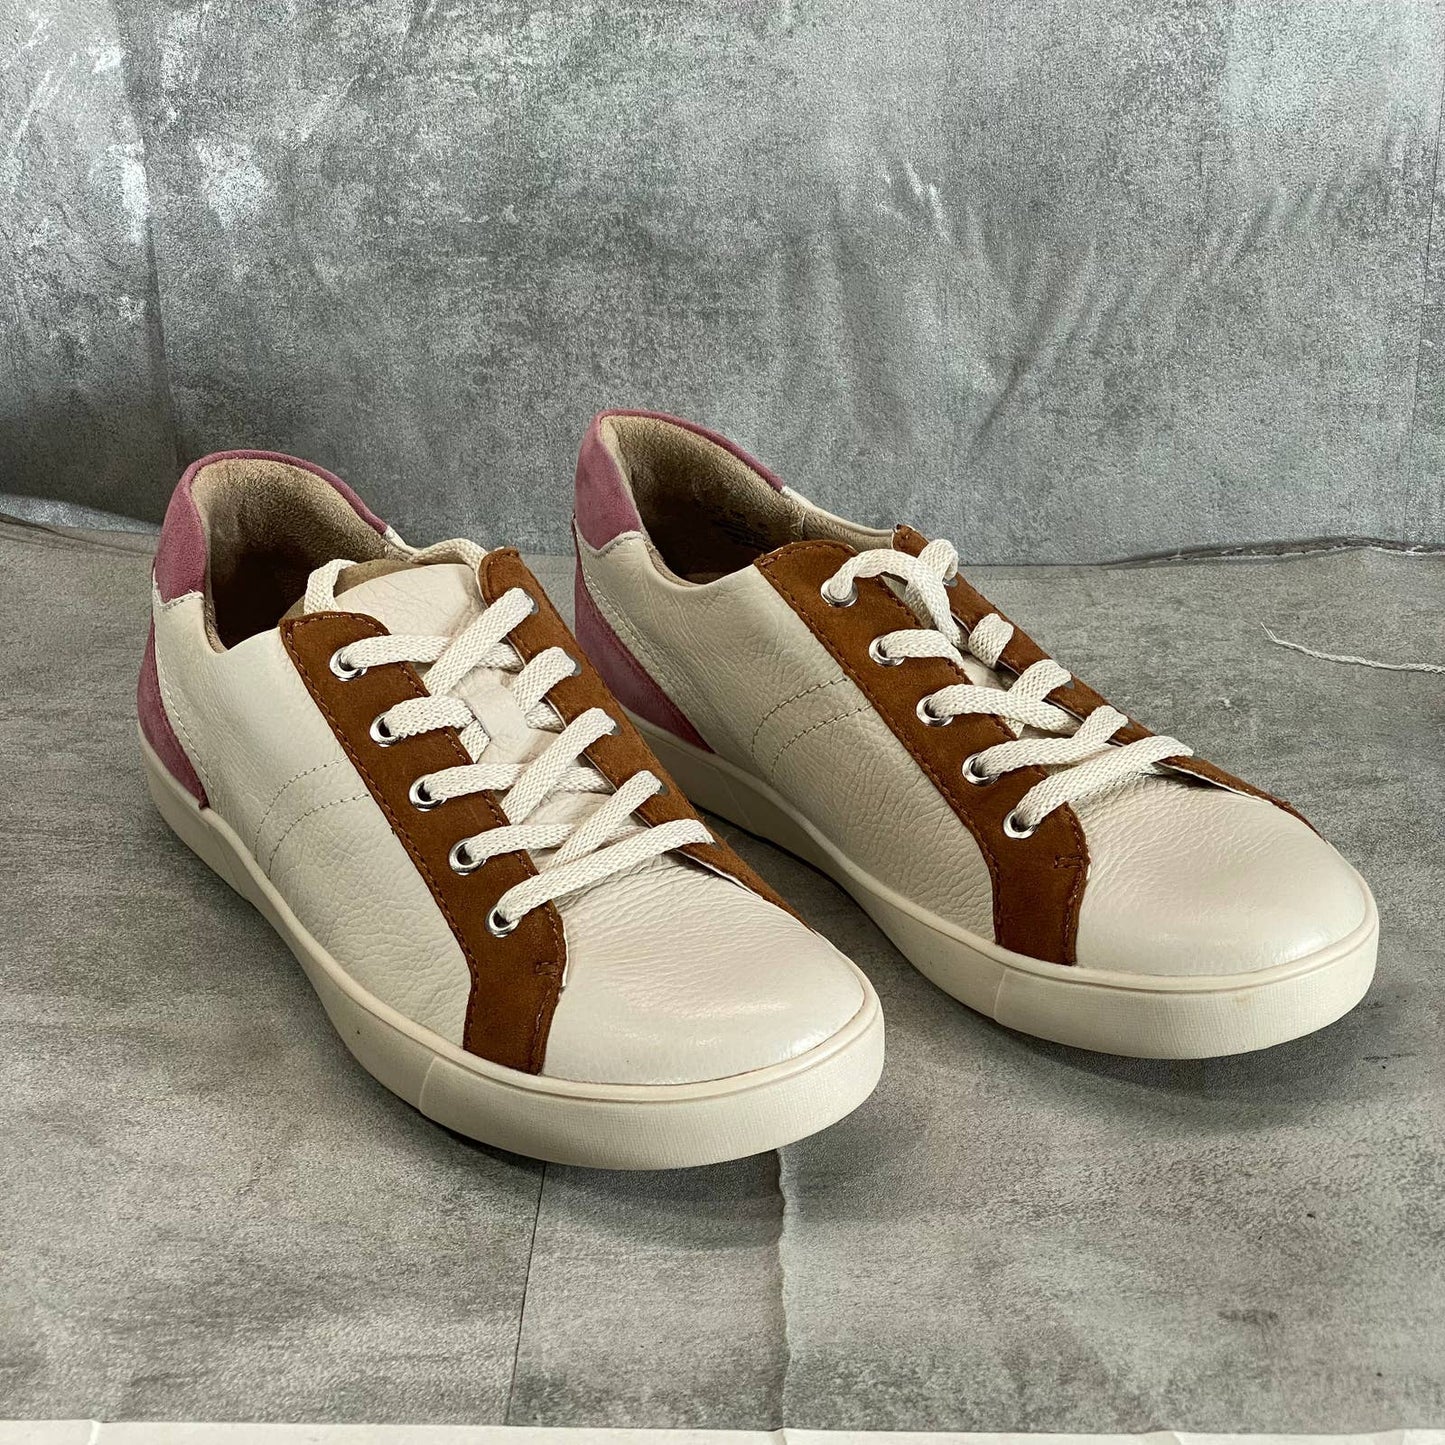 NATURALIZER Women's Wide Satin Pearl Leather Morrison Lace-Up Sneakers SZ 11W